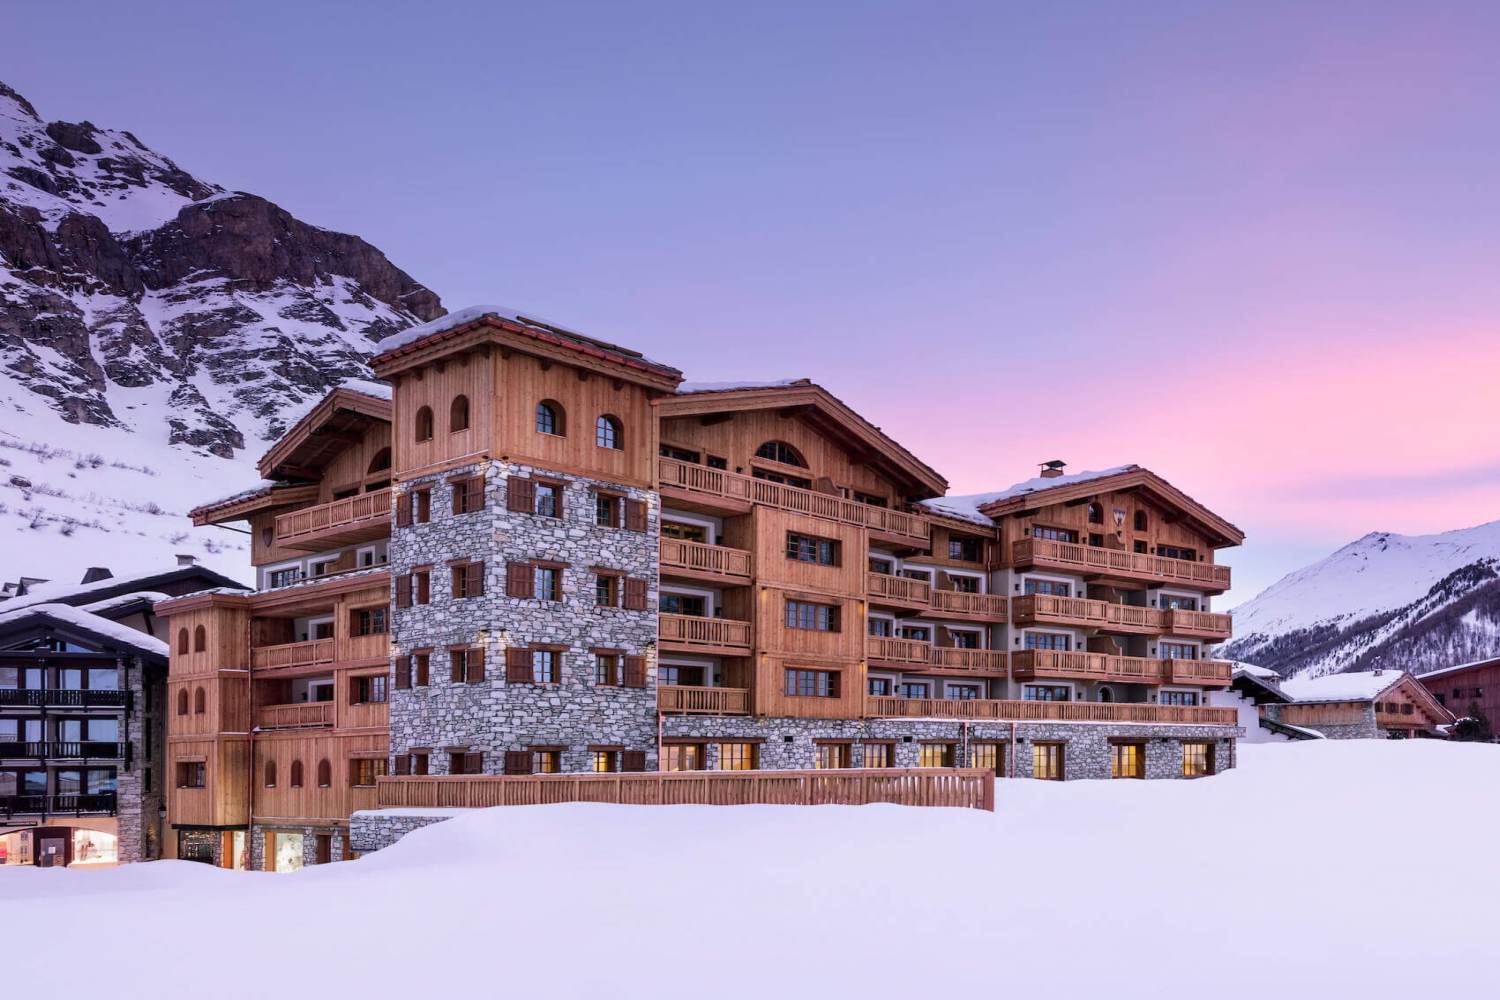 Hotel Le Blizzard Val d'Isere, Rhone Alpes - France